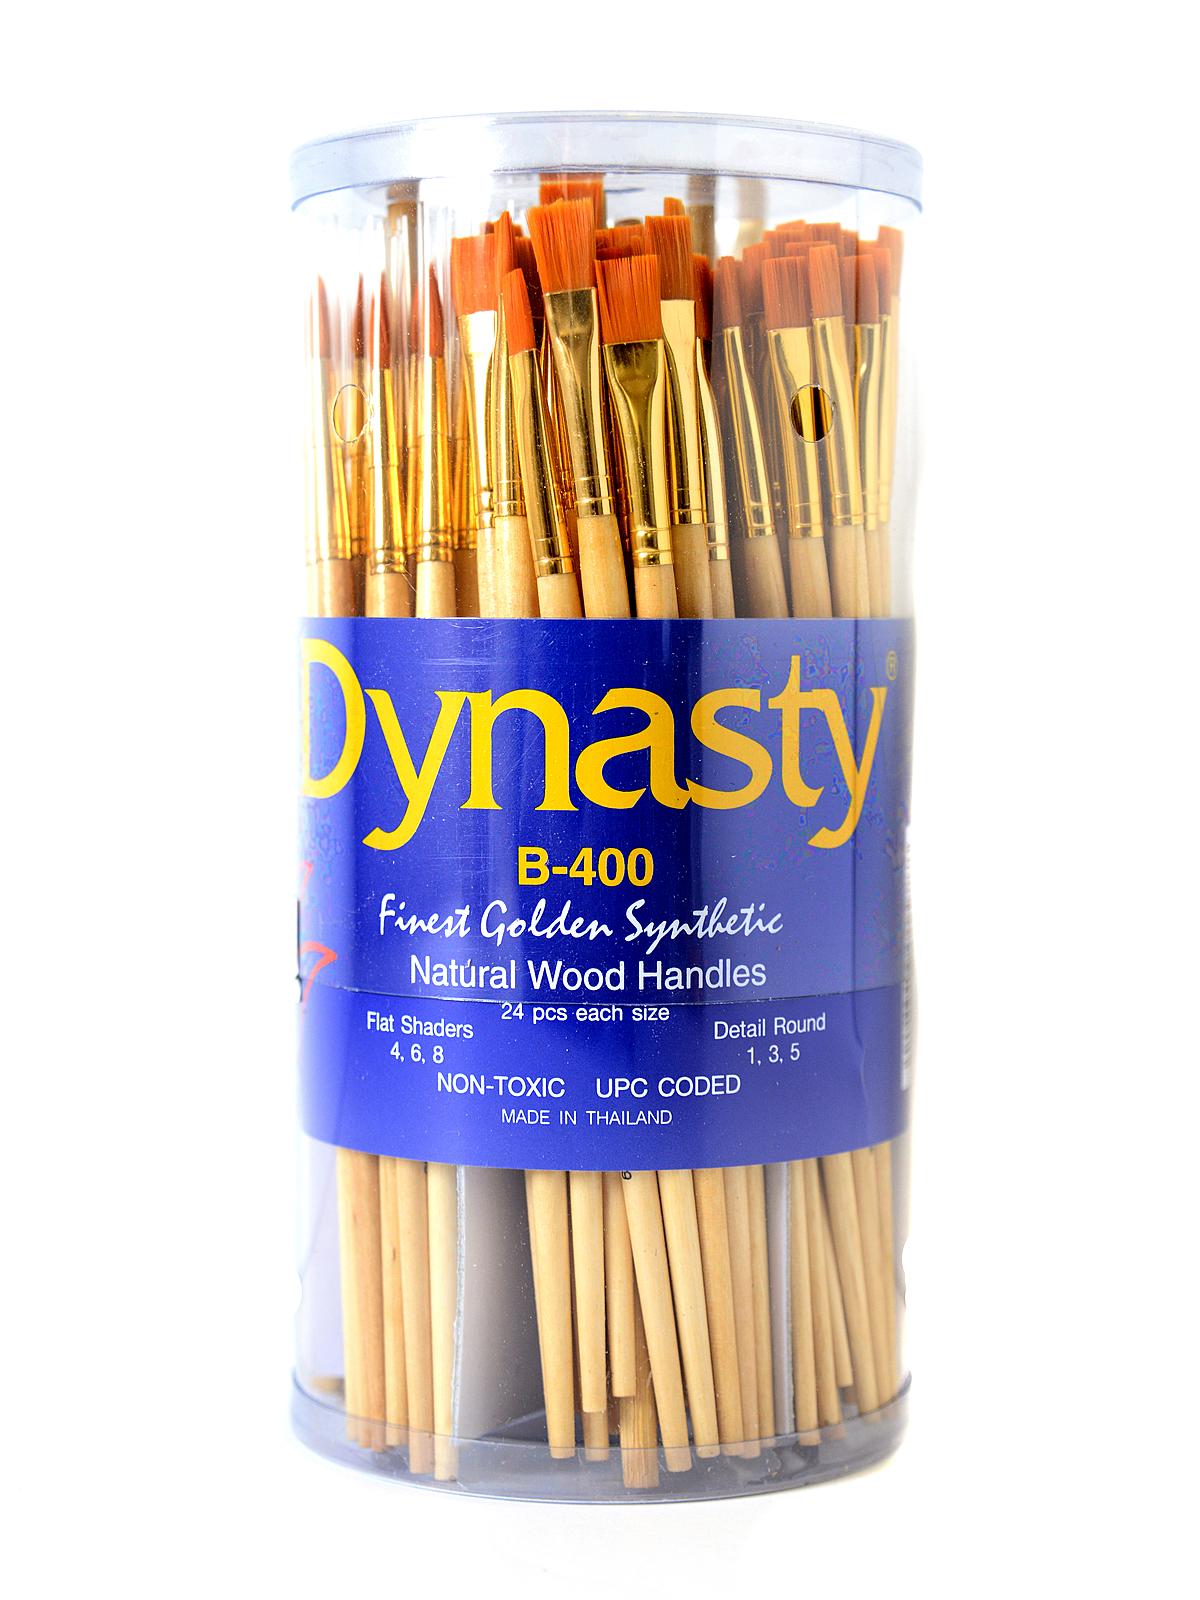 B-400 Golden Synthetic Brushes In Canister Canister Of 144